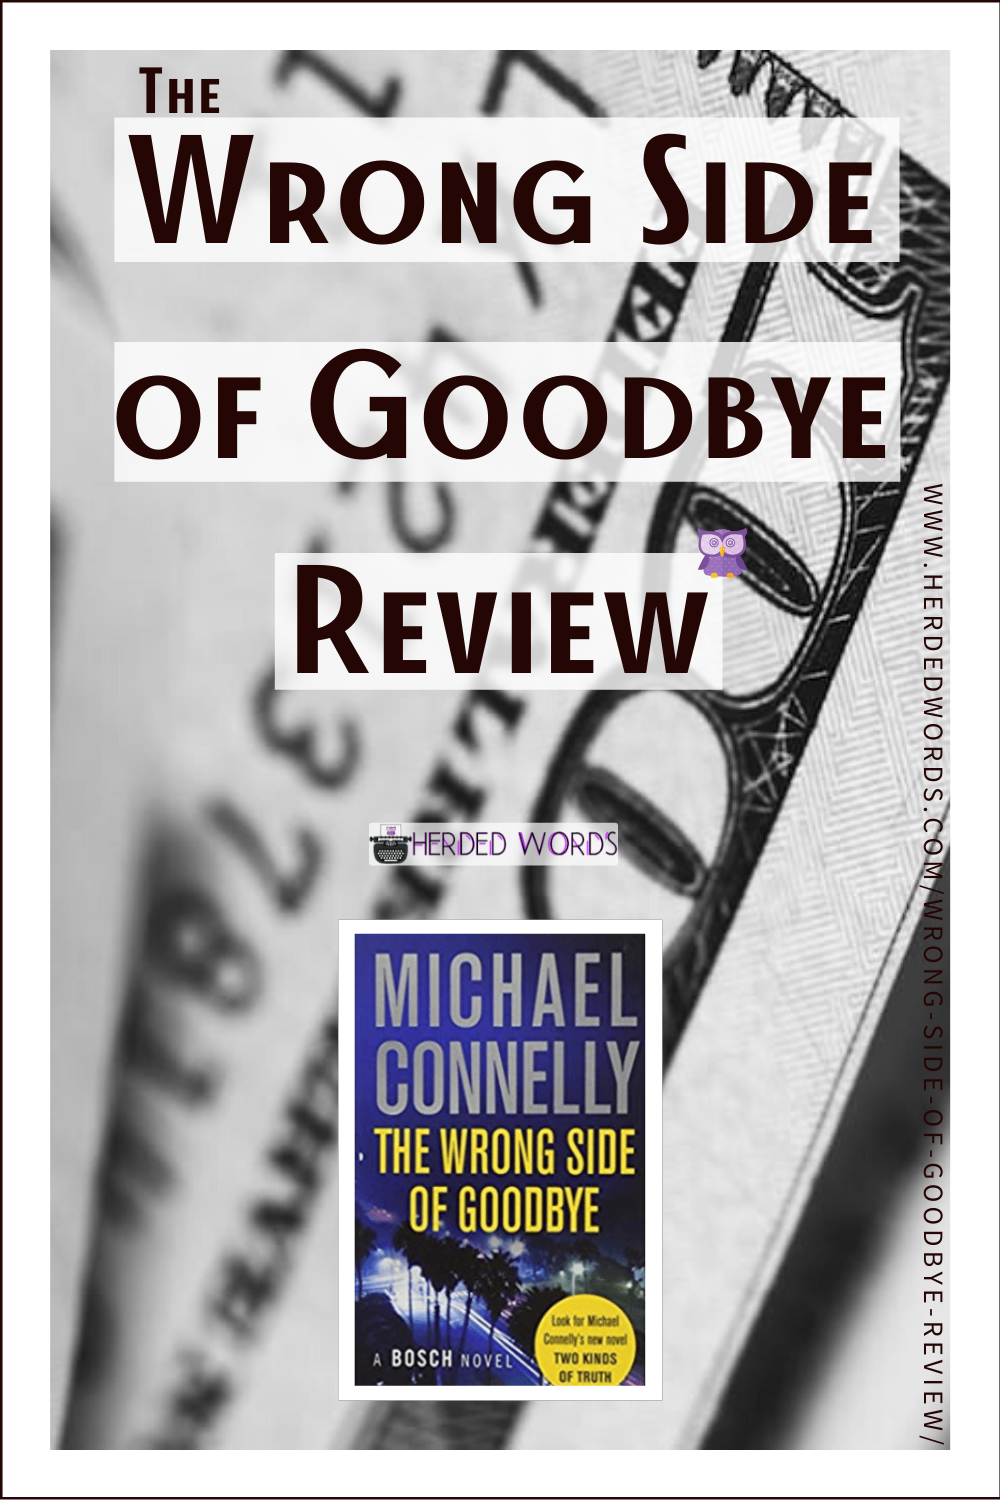 Pin This: Book Review & Analysis of THE WRONG SIDE OF GOODBYE